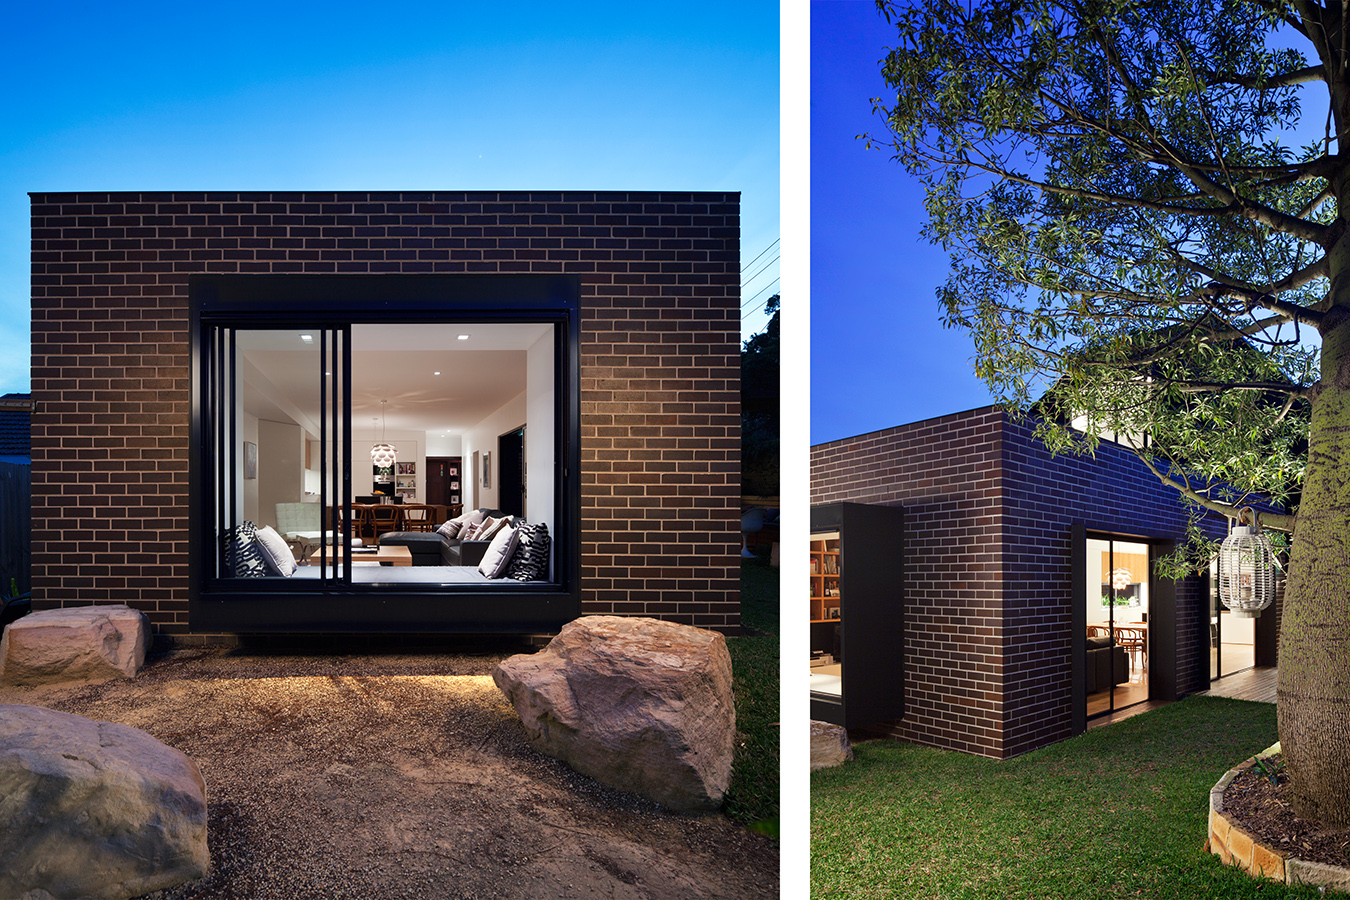 LILLYFIELD HOUSE FOR FOX JOHNSTON ARCHITECTS